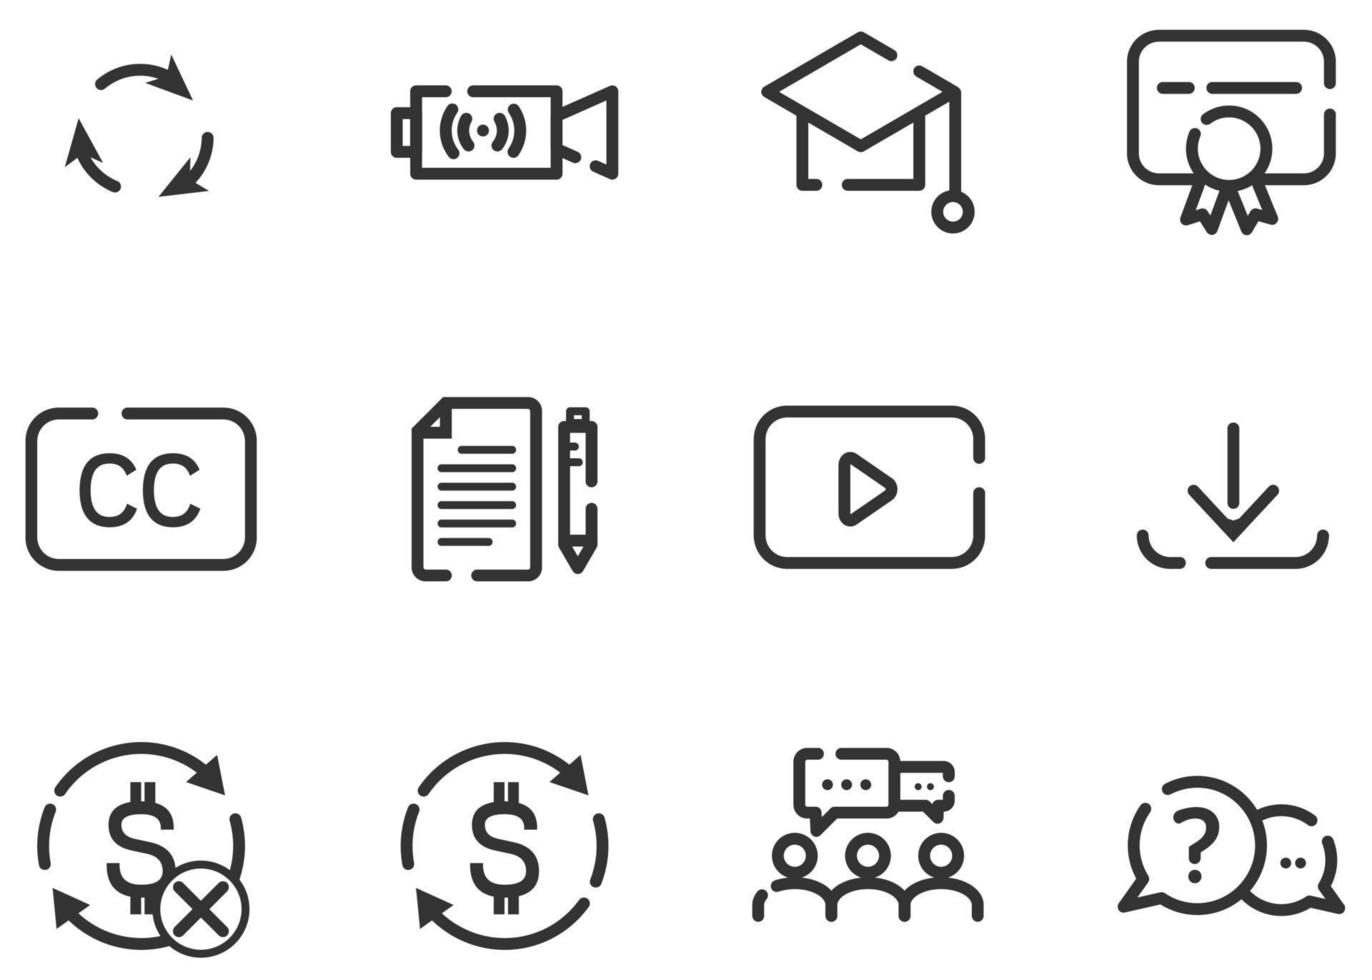 Online Education linear icons. Learning tool application for learner. Includes stream, download, project, files, support, community, certificate, accessibility, update, subscription symbol. vector